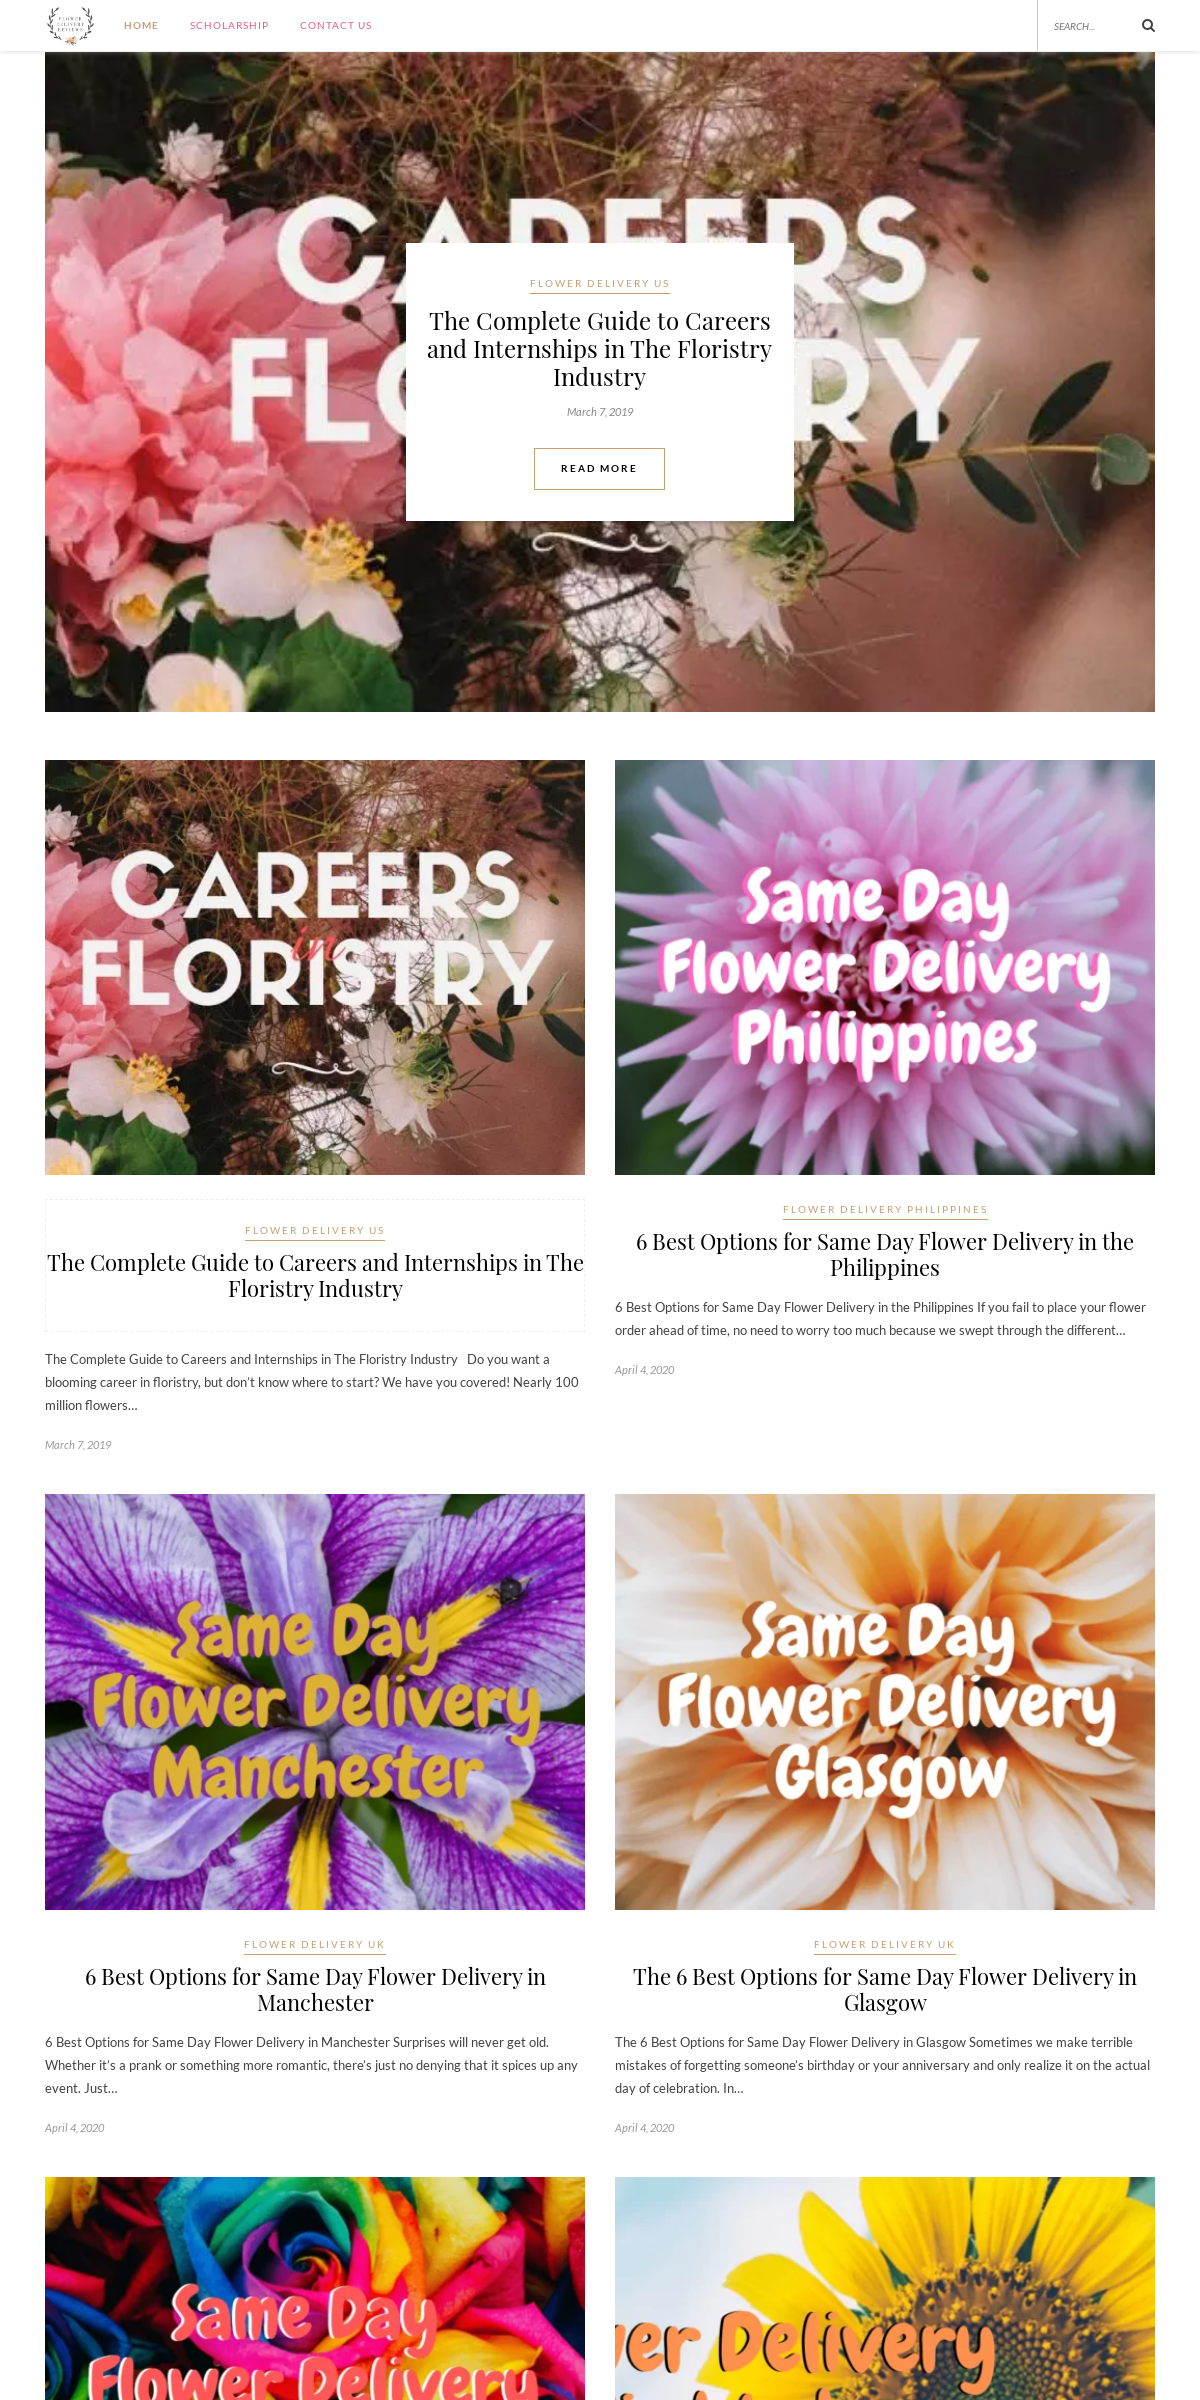 A complete backup of flowerdelivery-reviews.com